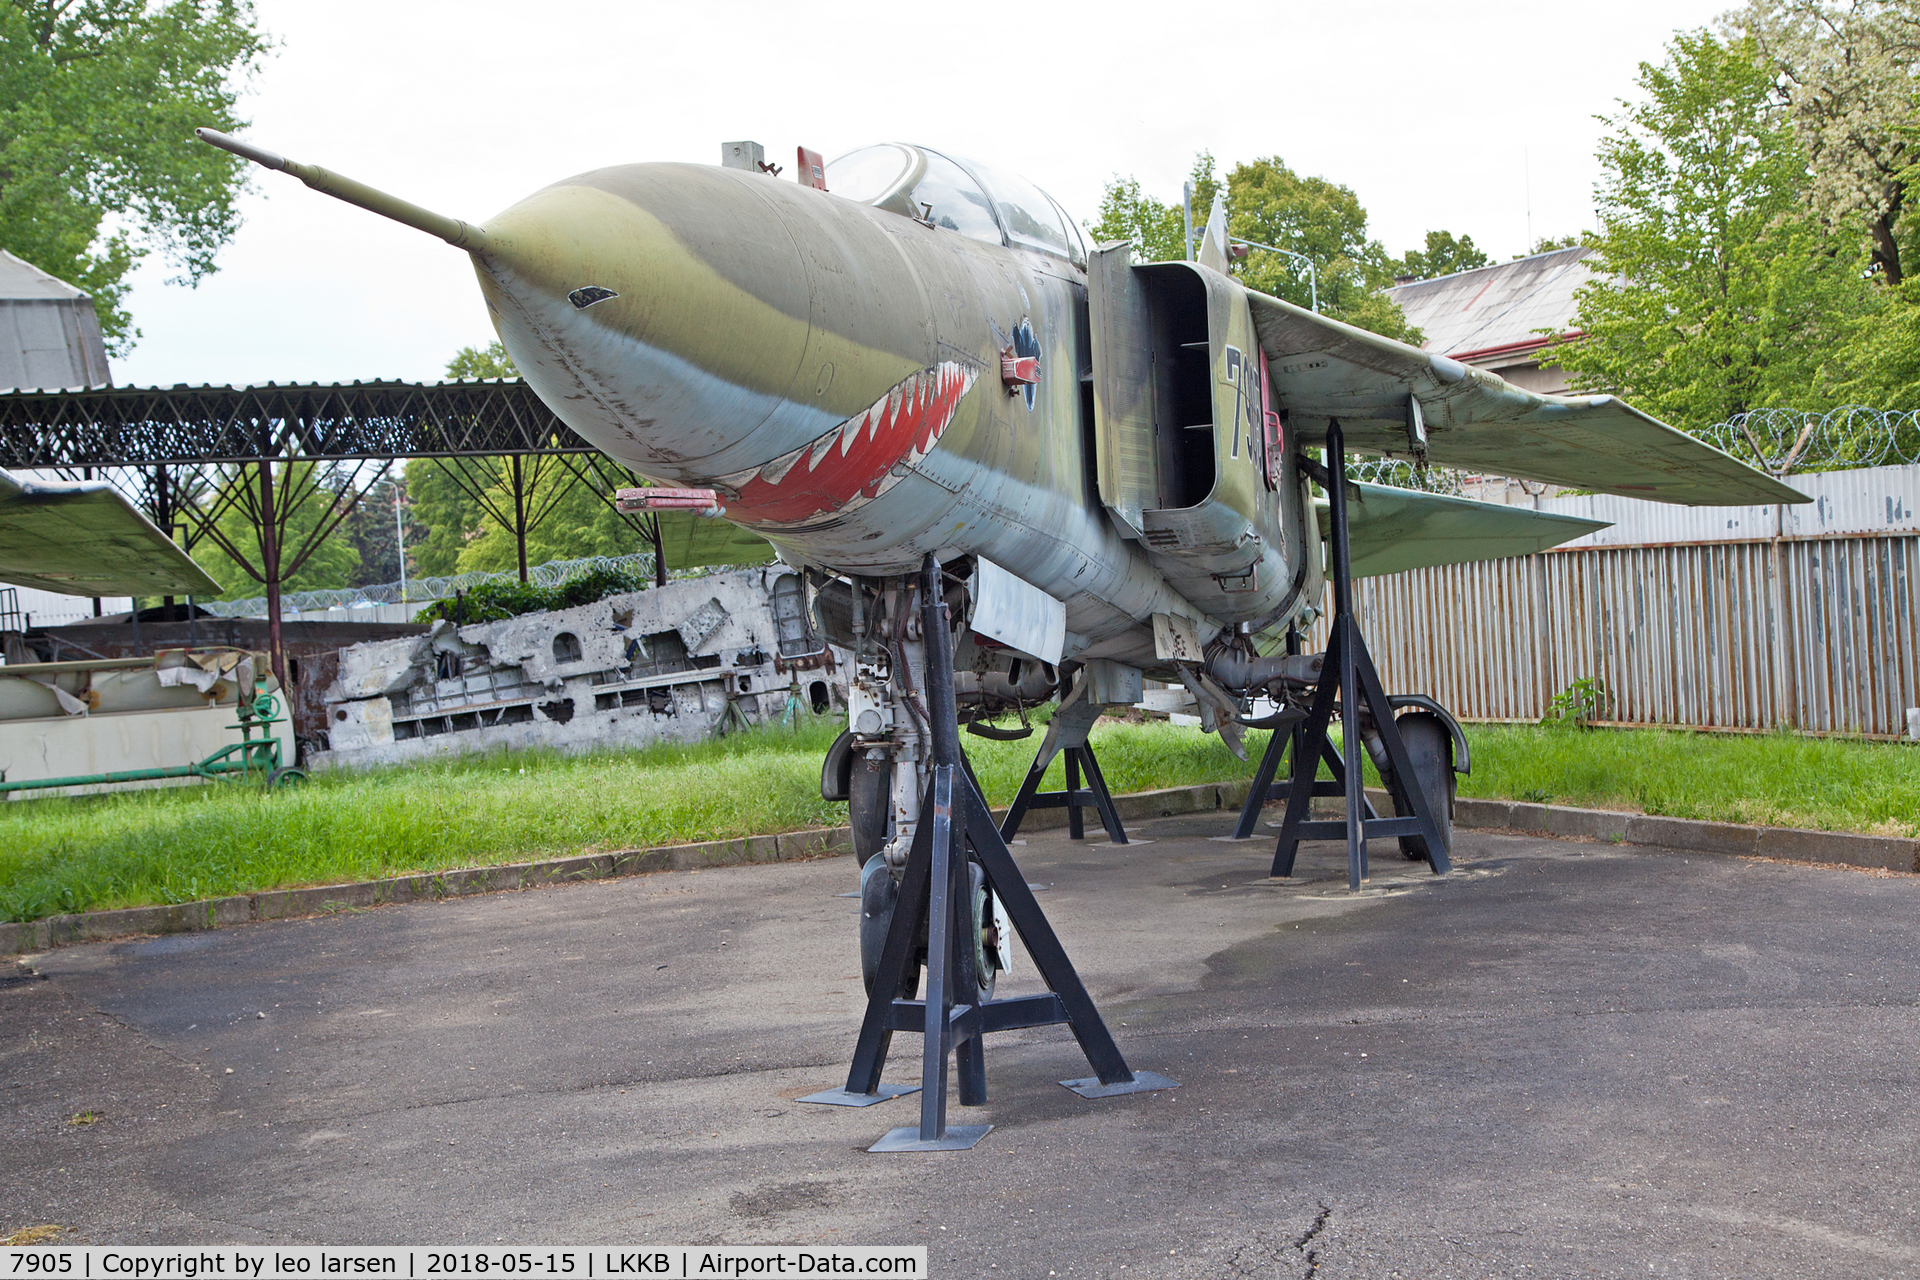 7905, 1979 Mikoyan-Gurevich MiG-23UB C/N A1037905s, Kebly Air Museum 15.5.2018